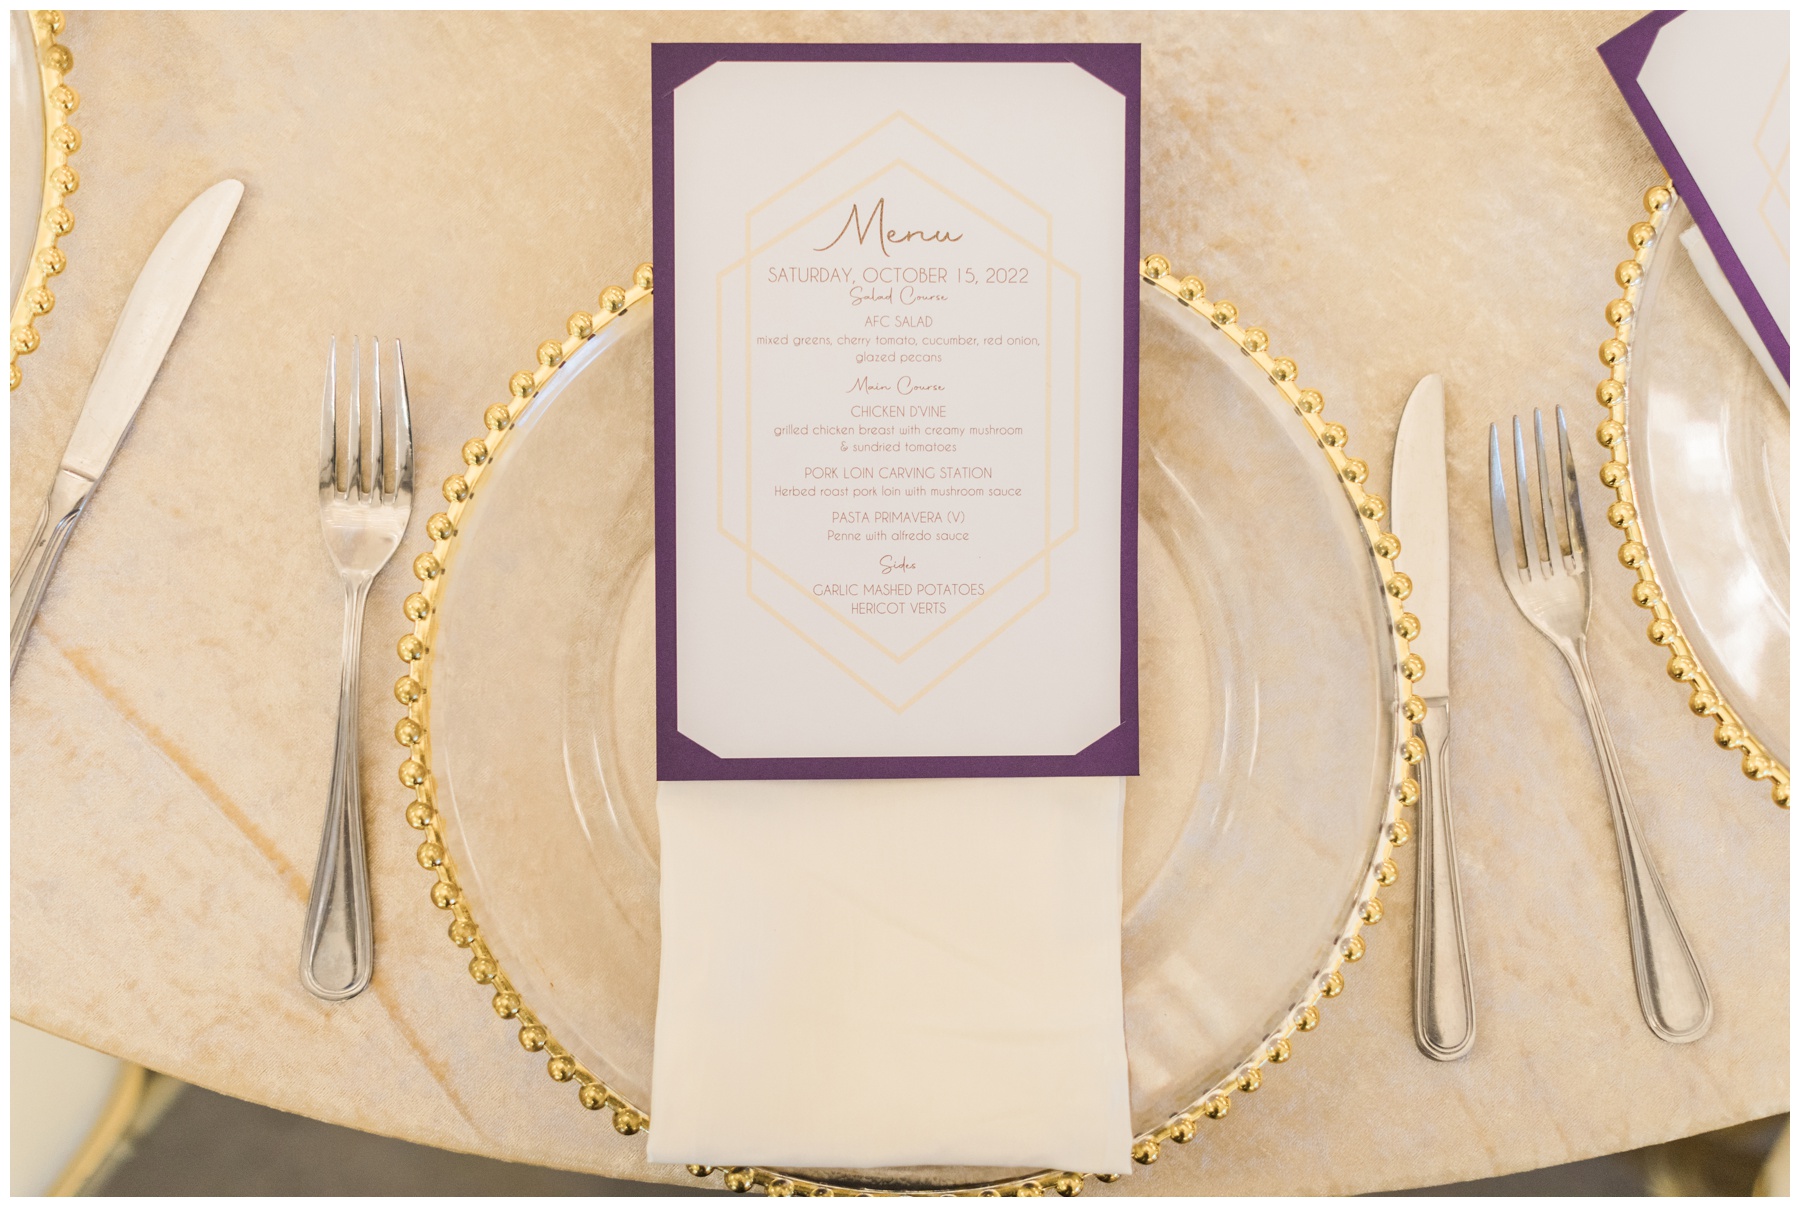 Multicultural wedding reception at The Peach Orchard